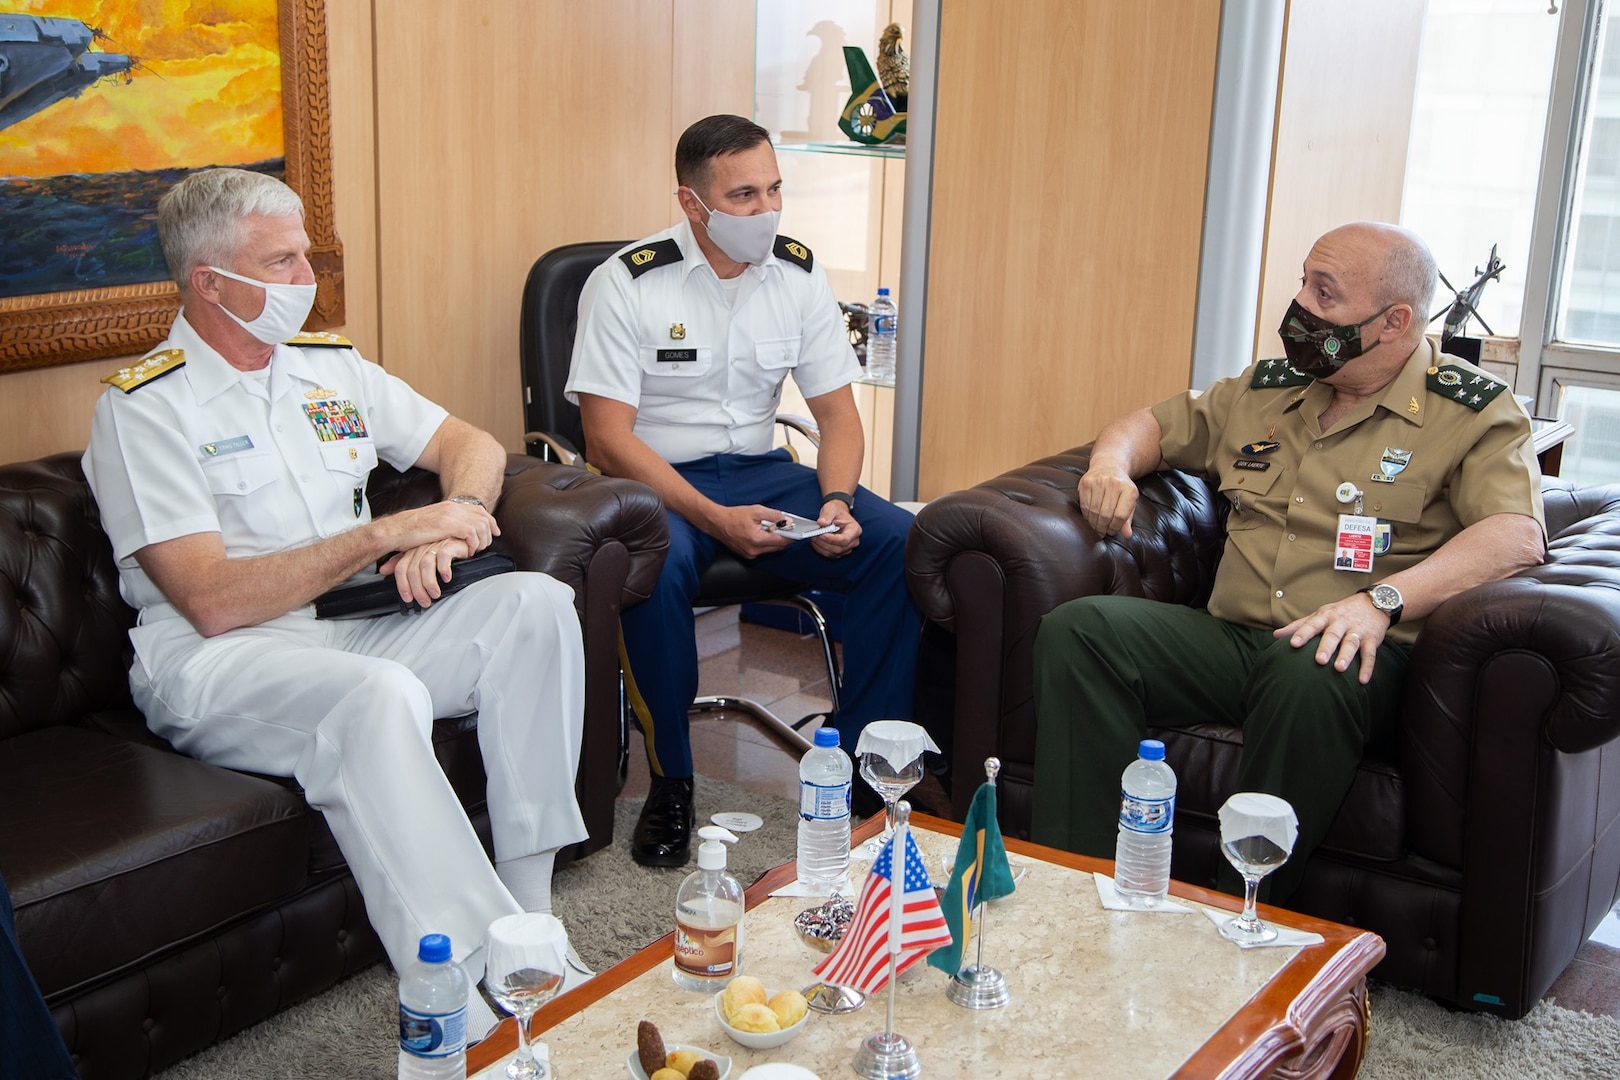 U.S. Navy Adm. Craig S. Faller, commander of U.S. Southern Command, meets with Brazil's Chief of the Joint Armed Forces Staff, Gen. Laerte de Souza Santos.